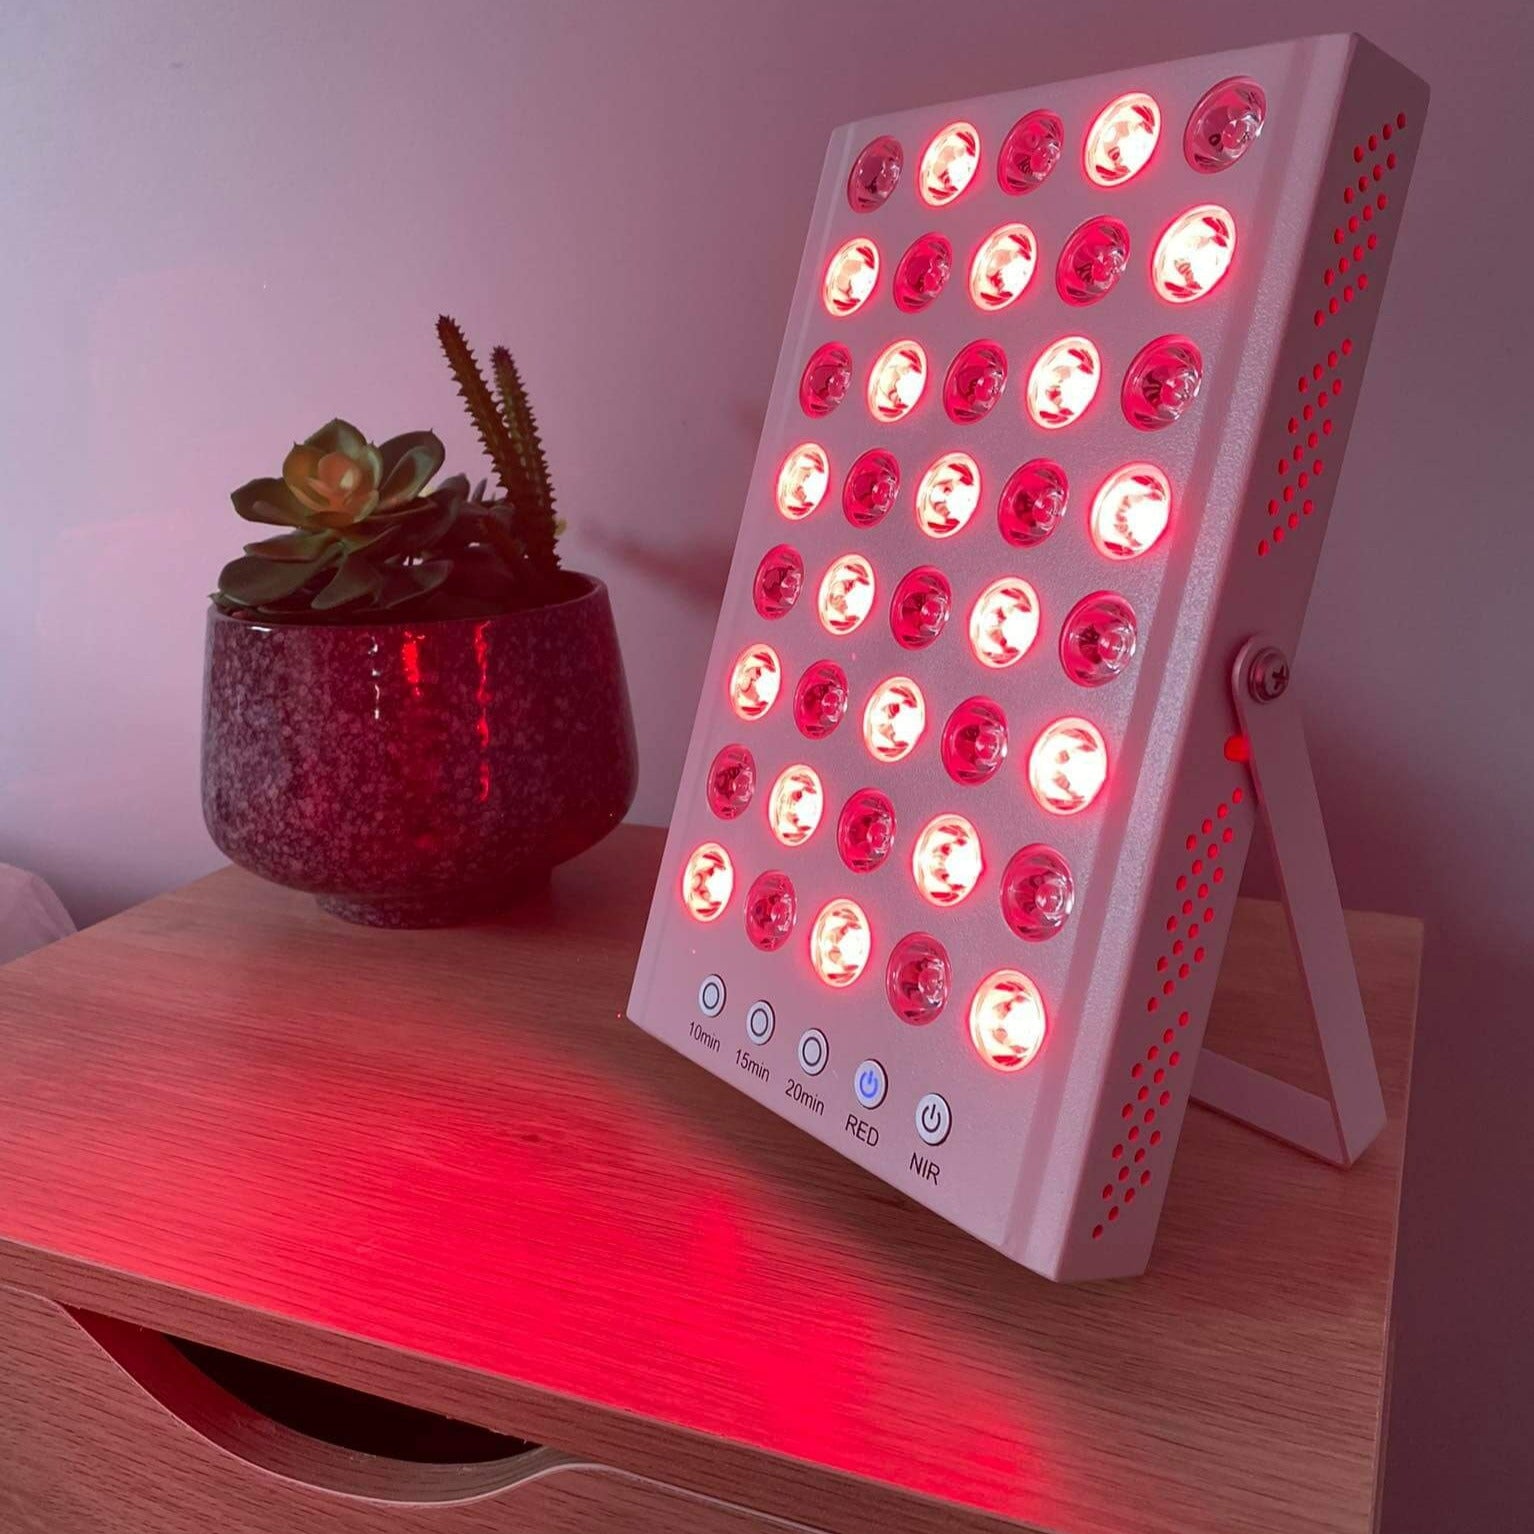 Red Light Therapy PowerPanel Mini